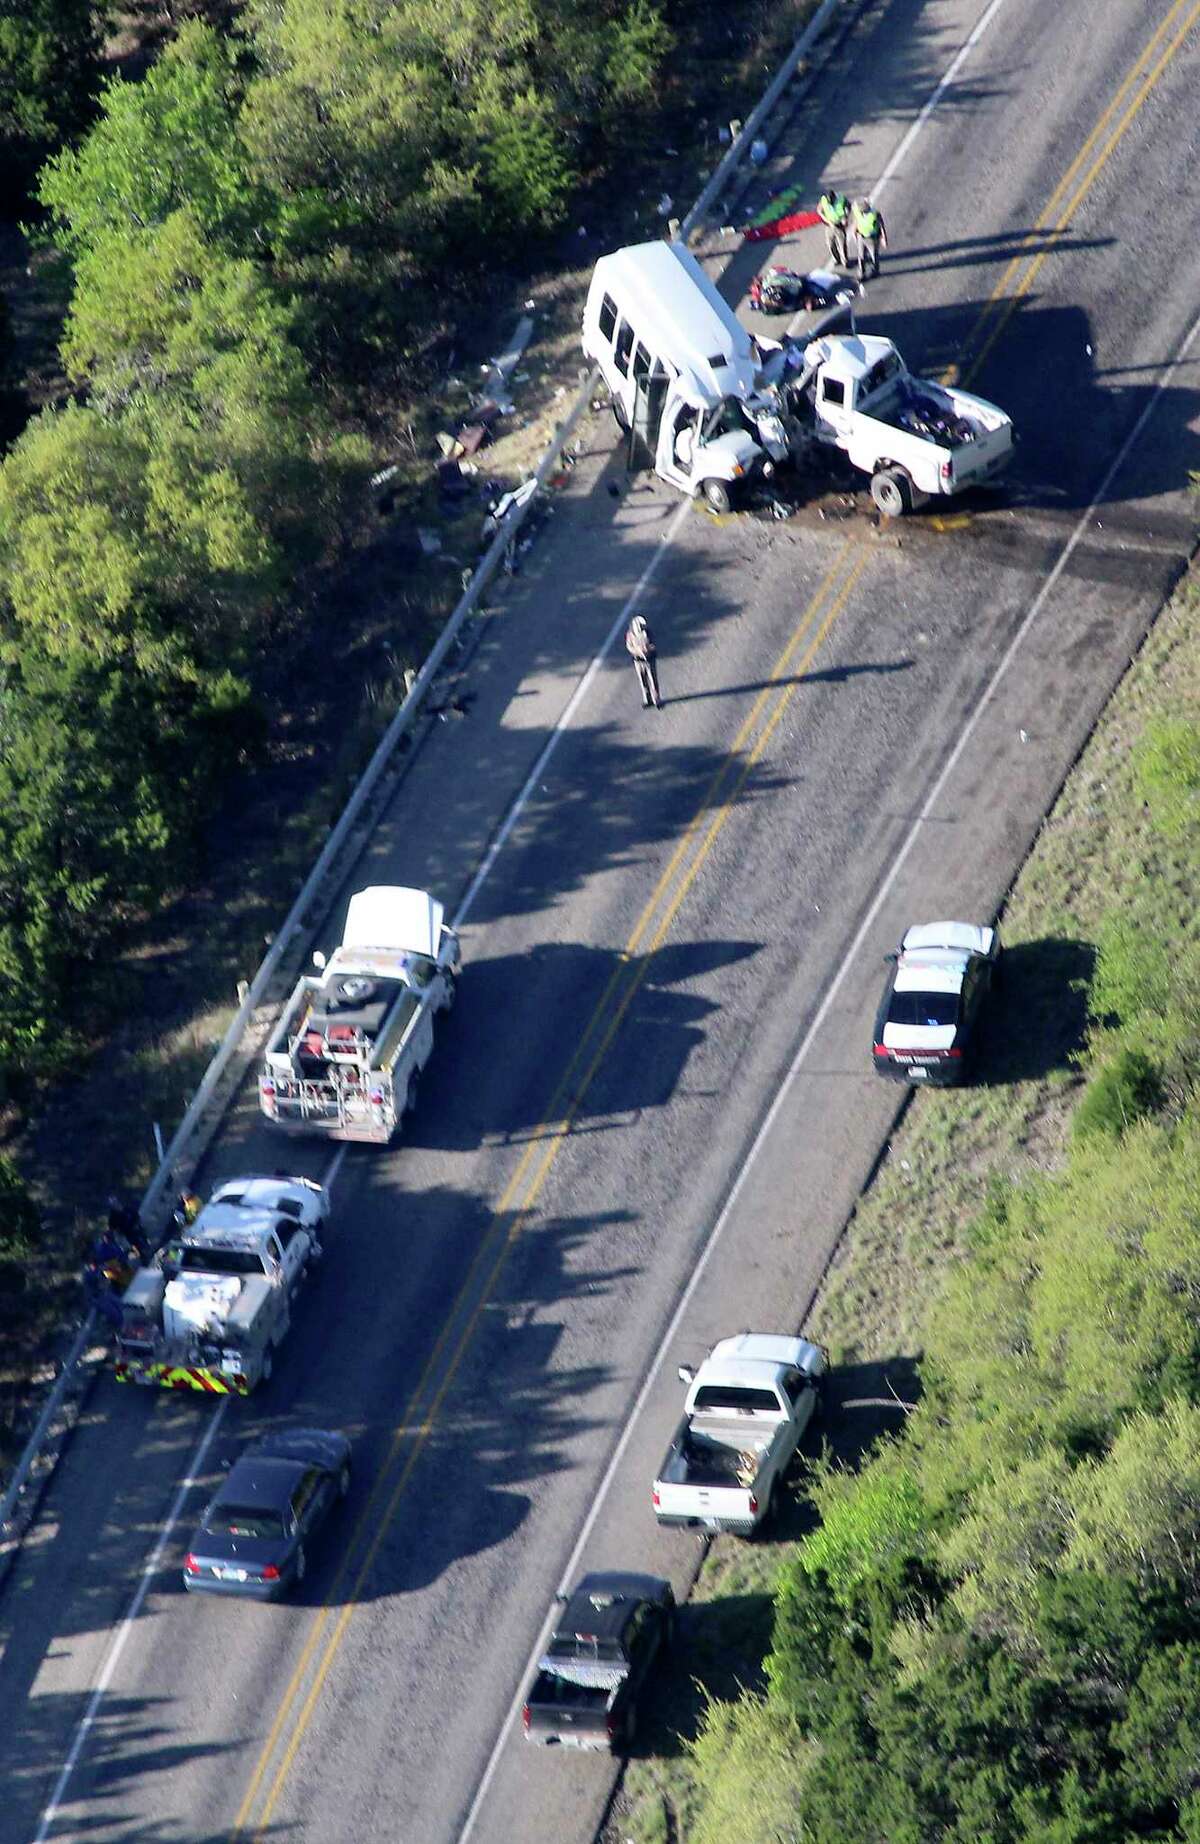 A major collision has shut down Highway 83 near Garner State Park, the Uvalde County Sheriff's Office announced and news outlets are reporting multiple fatalities.